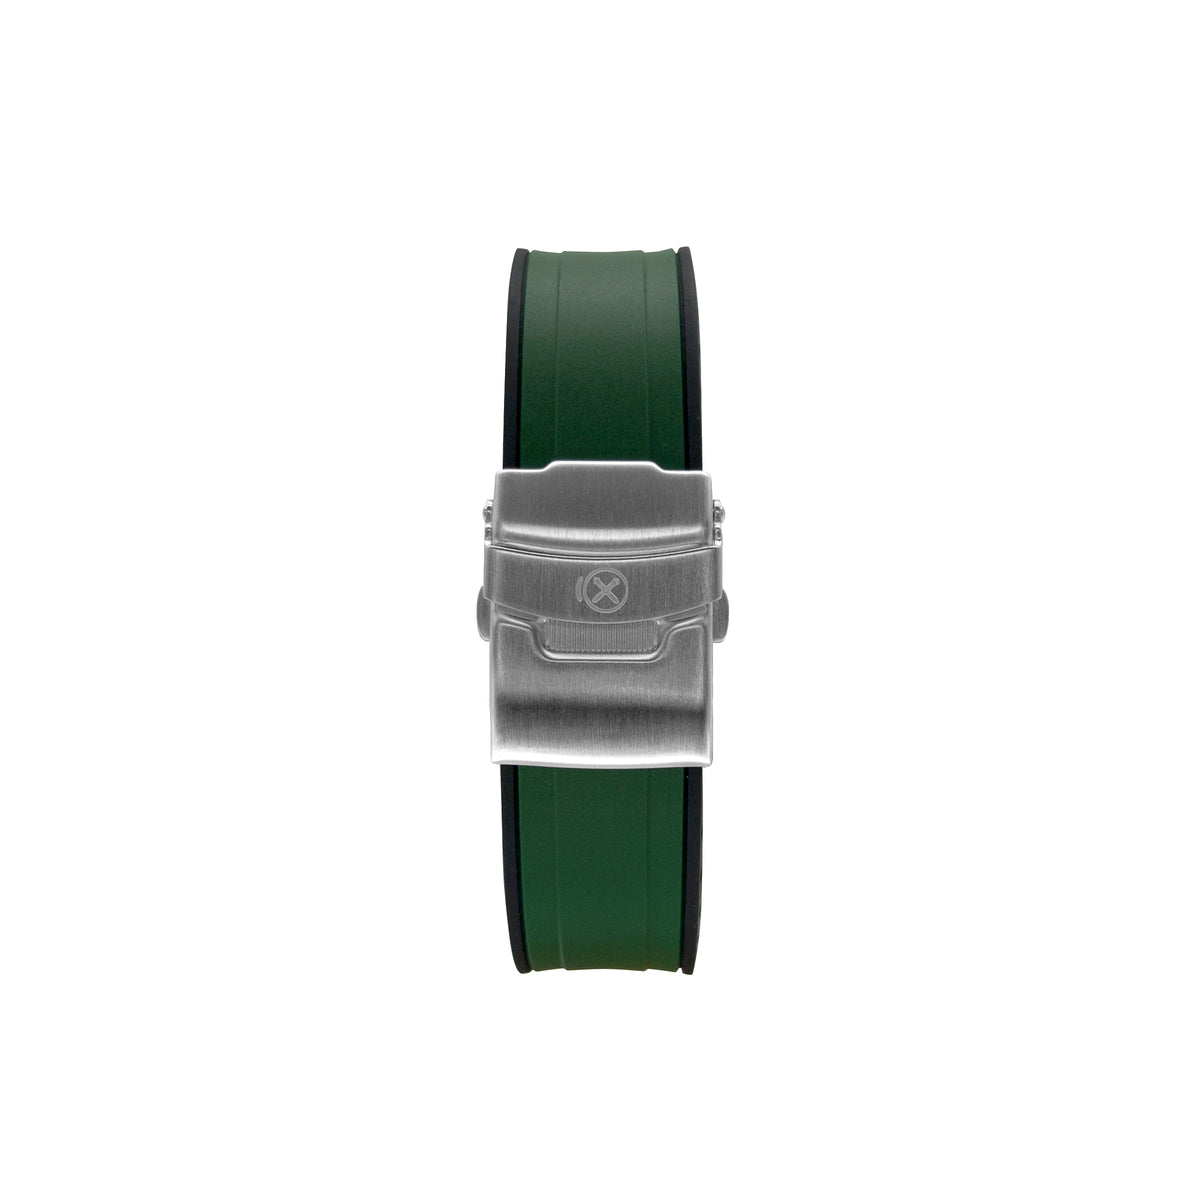 StrapXPro Curved End Rubber Strap for Seiko SKX/5KX in Green/Black (22mm) - Nomad Watch Works MY